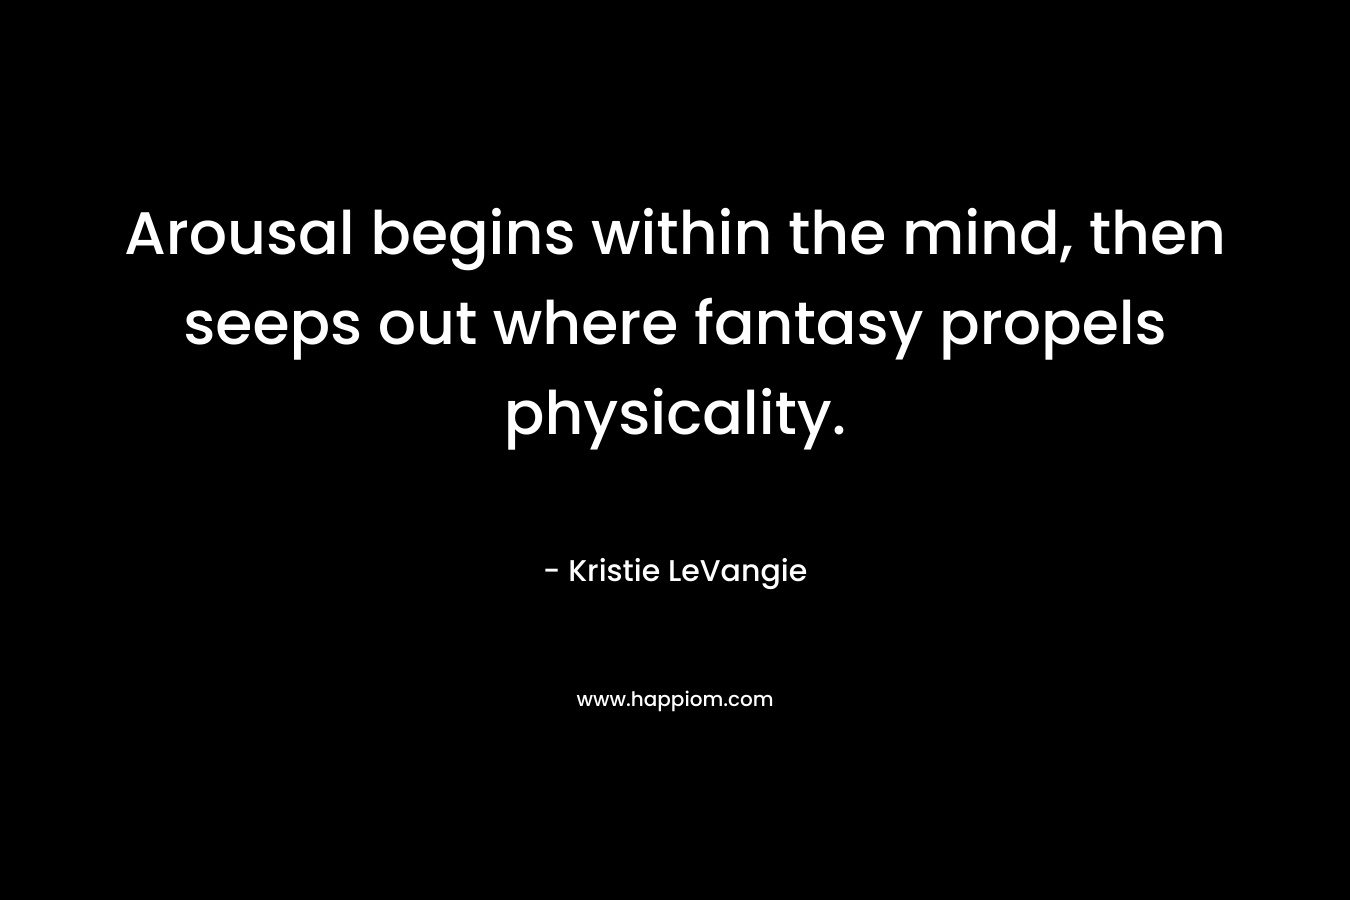 Arousal begins within the mind, then seeps out where fantasy propels physicality. – Kristie LeVangie